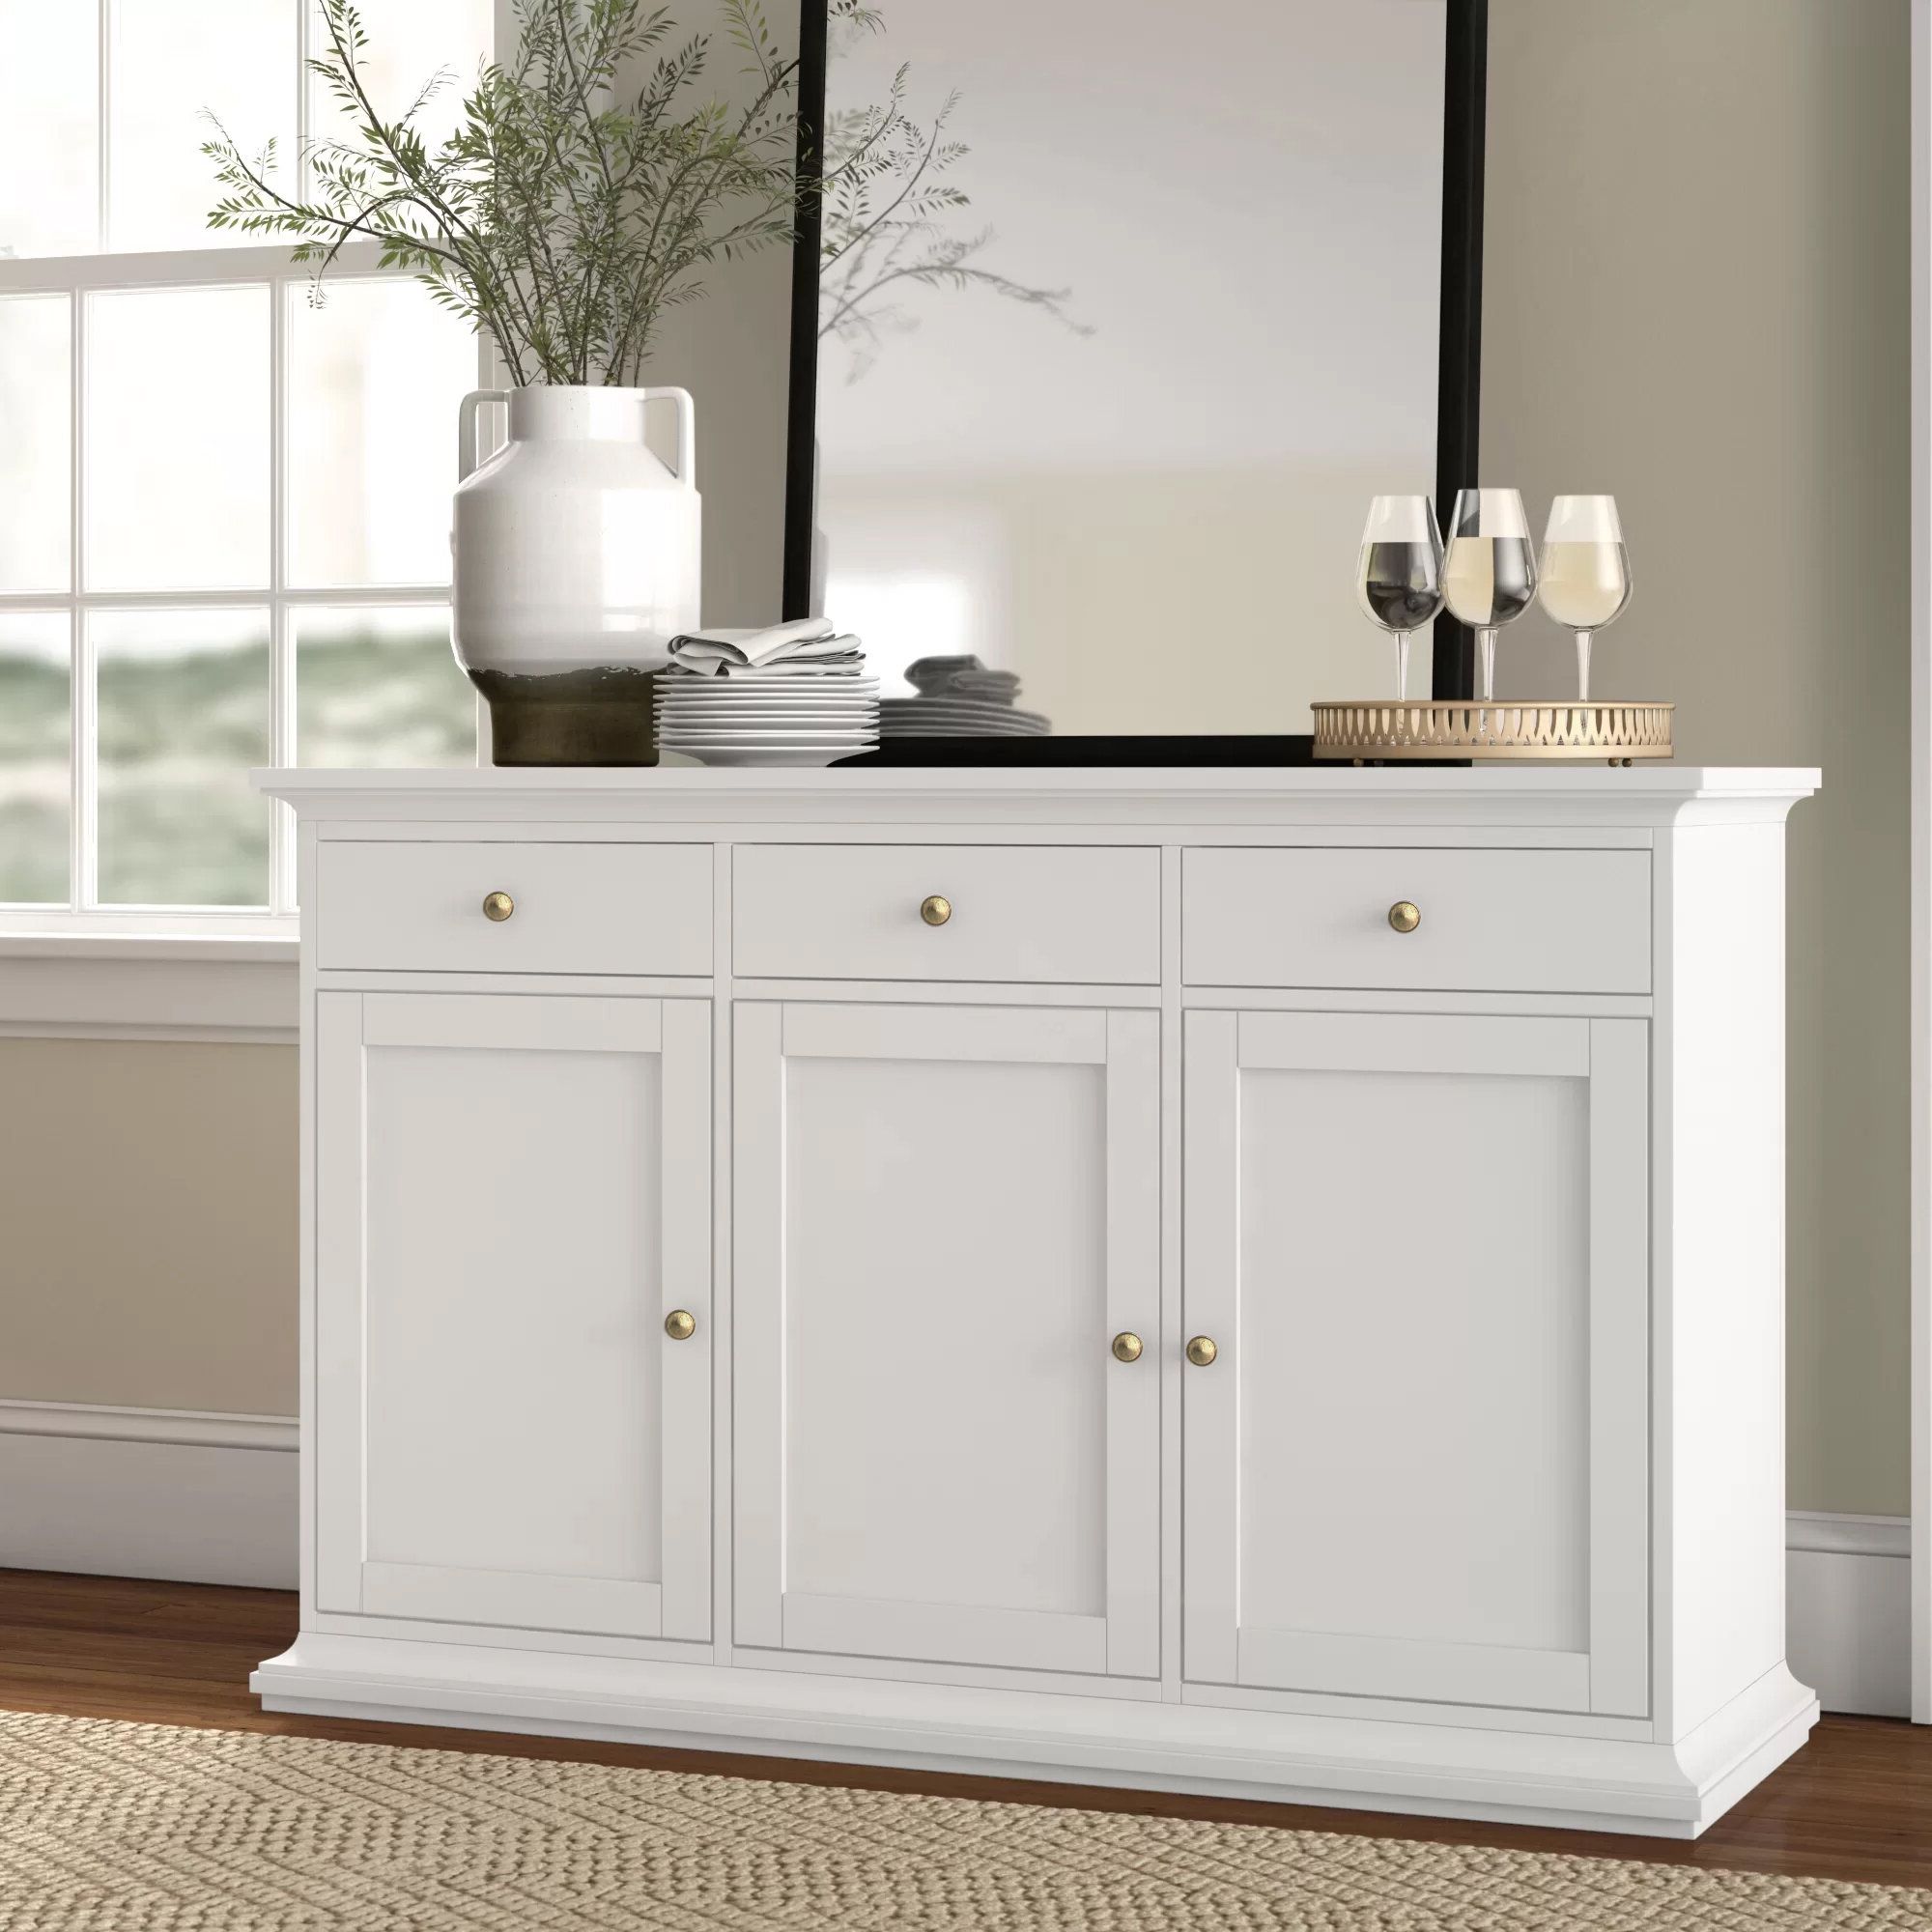 Three Posts™ Laux 56.57" Wide 3 Drawer Sideboard & Reviews | Wayfair Intended For Sideboards With 3 Drawers (Gallery 1 of 20)